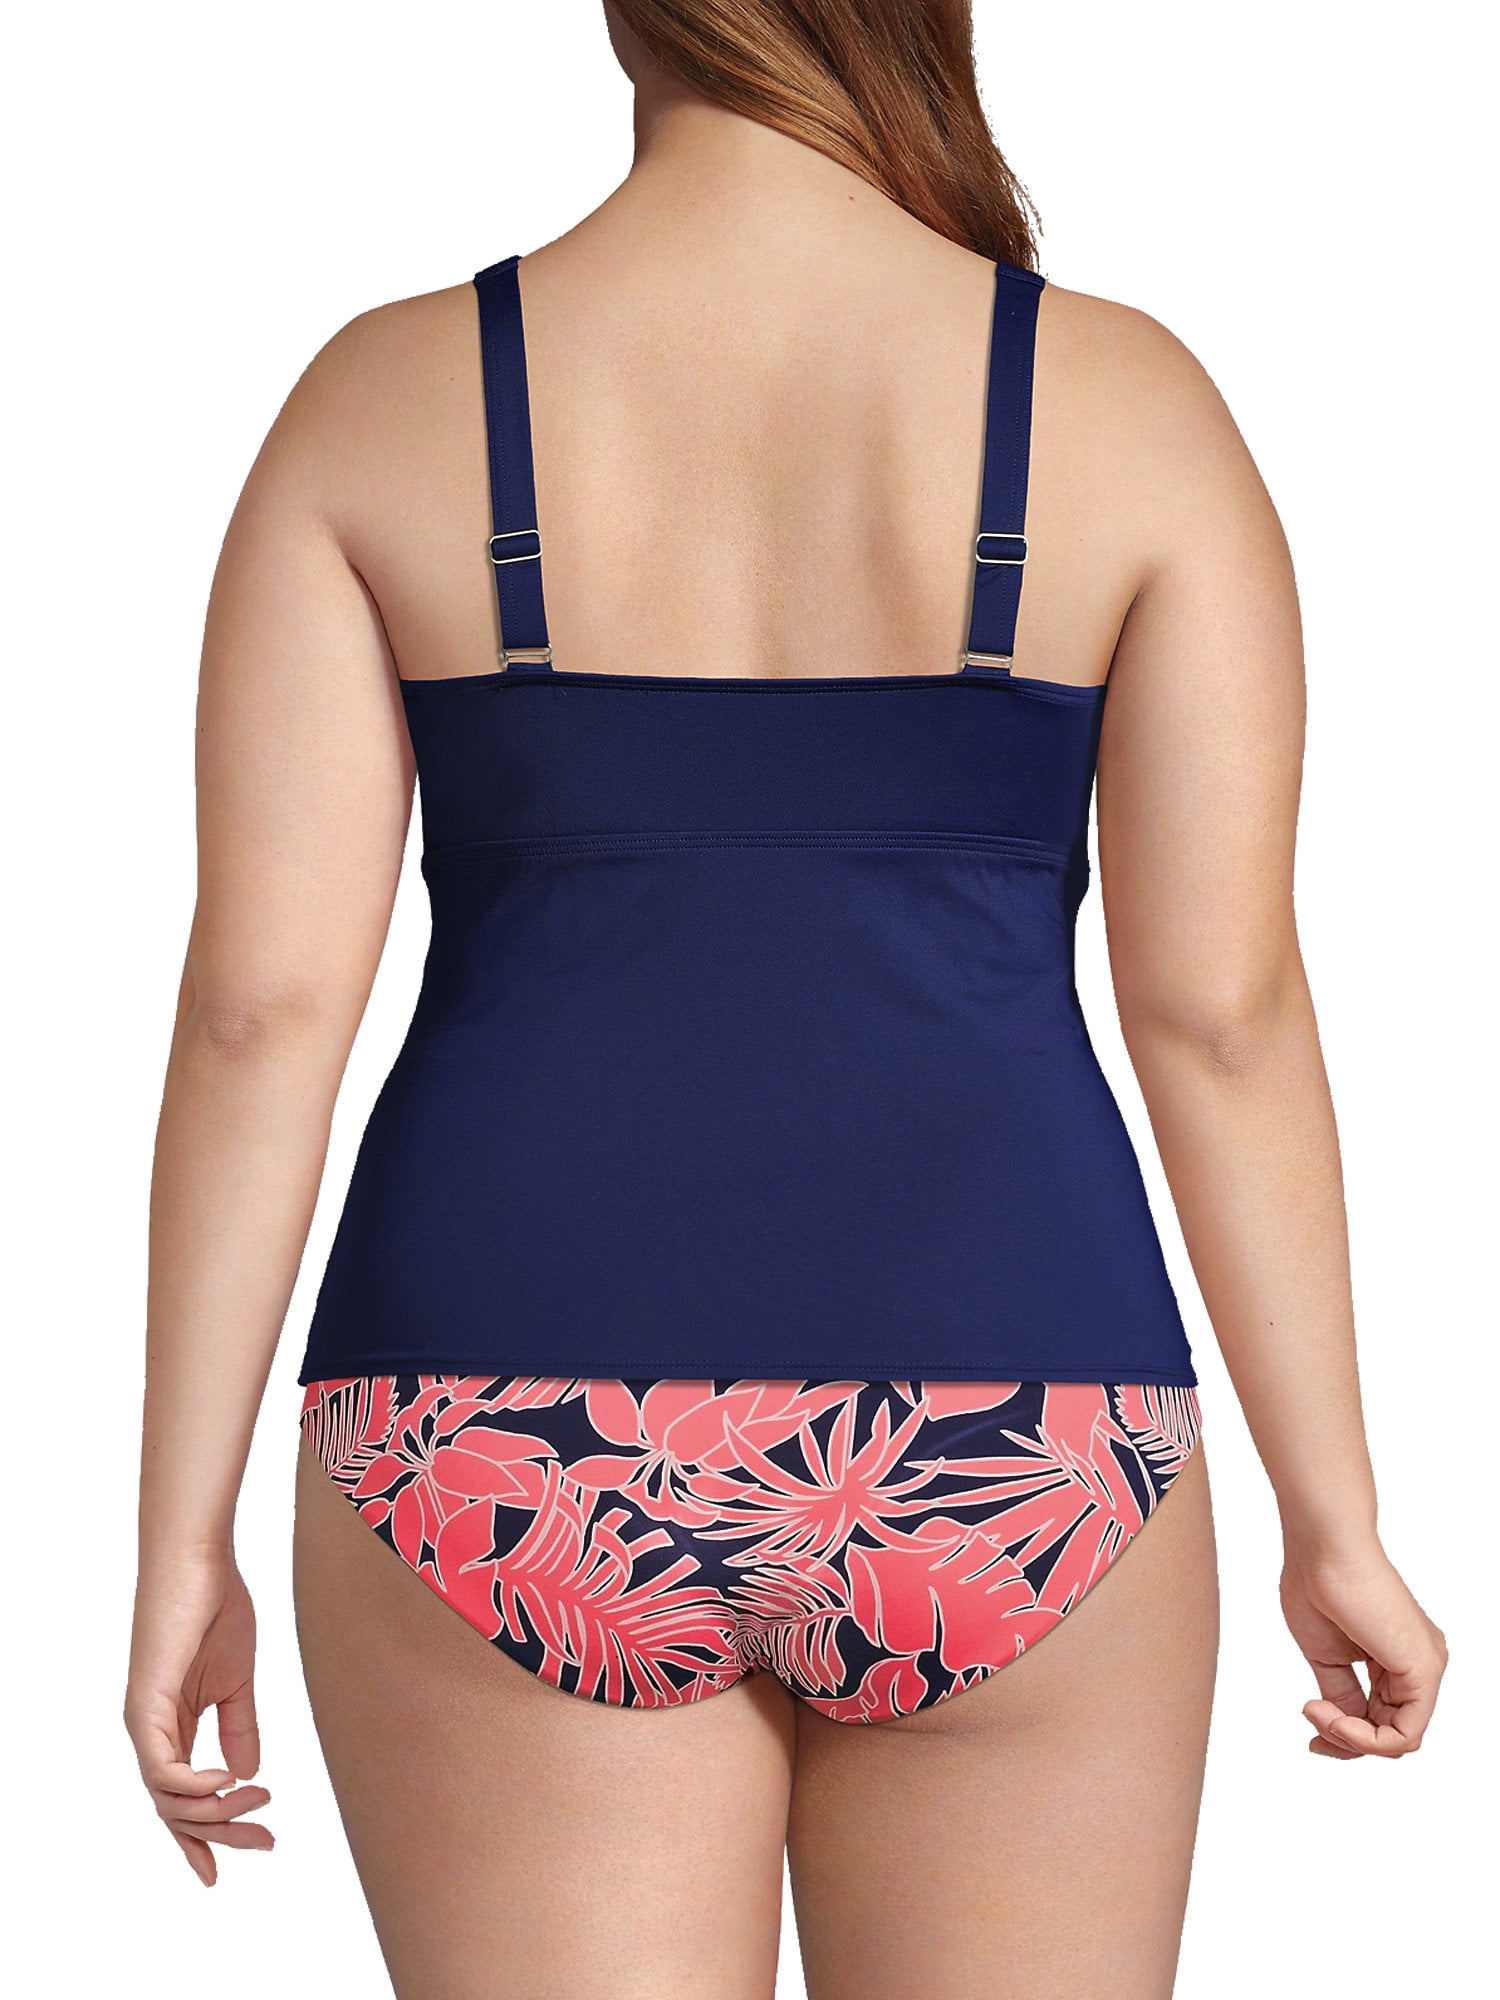 Lands' End Women's Plus Size DDD-Cup Chlorine Resistant Tummy Control  Underwire Tankini Swimsuit Top 